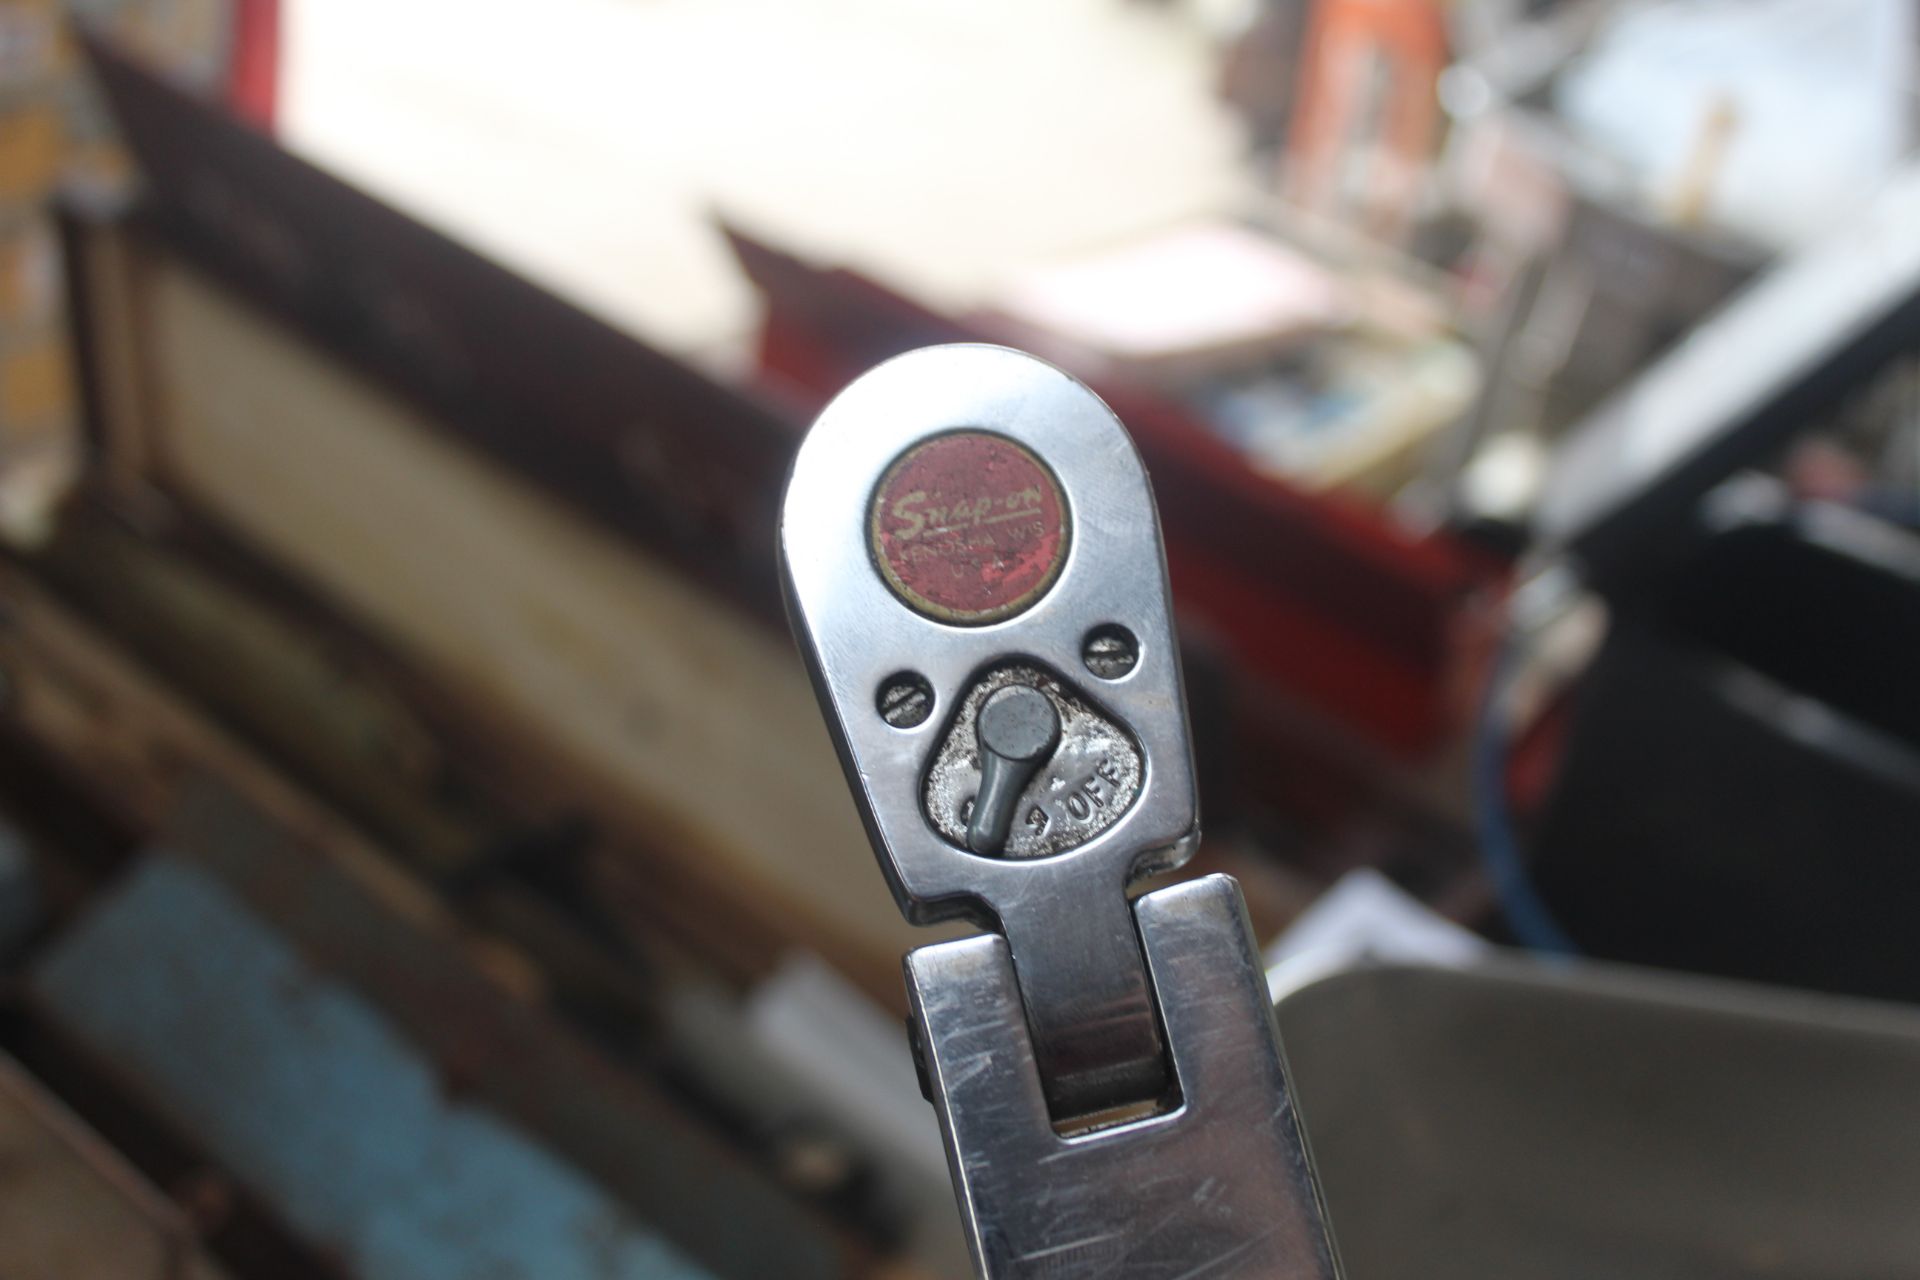 Snap-On torque wrench. - Image 5 of 6